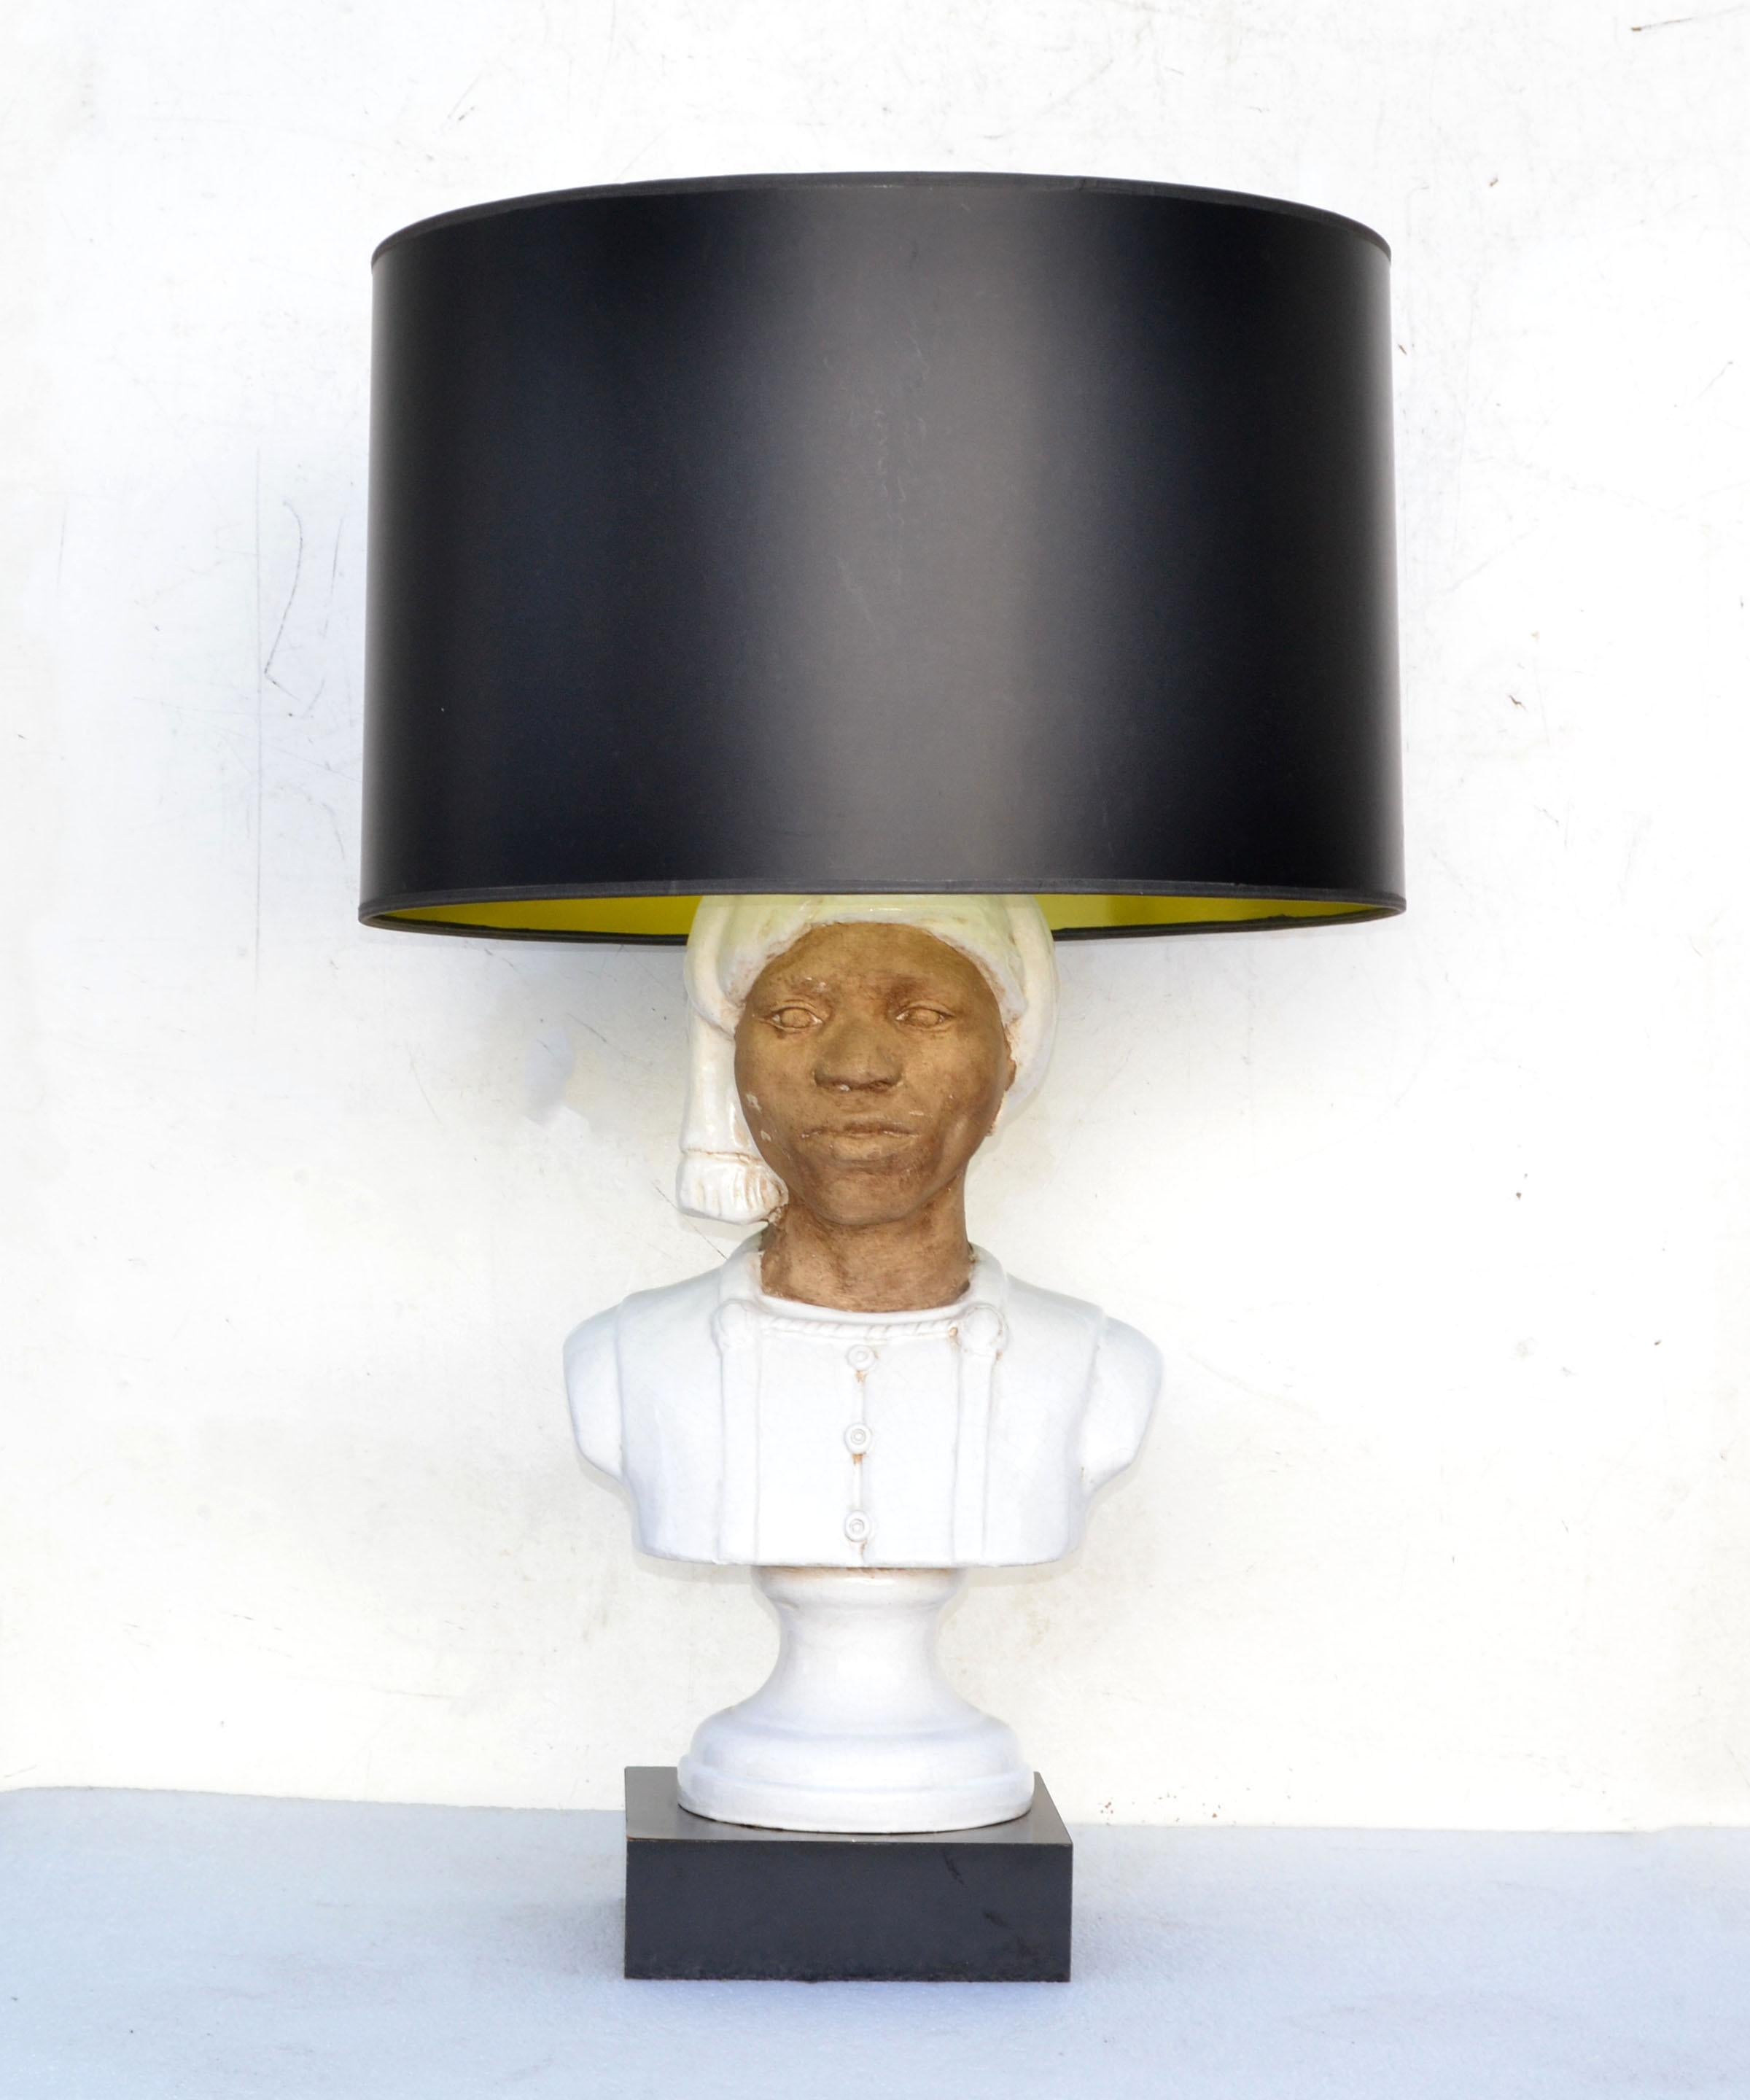 One of a kind bedouin head bust table lamp.
Bust is handmade out of Terracotta and Ceramic and mounted on a black lacquered base.
Marked at the reverse.
Wired for Europe, can be modified to US Rewiring. It is in perfect working condition and